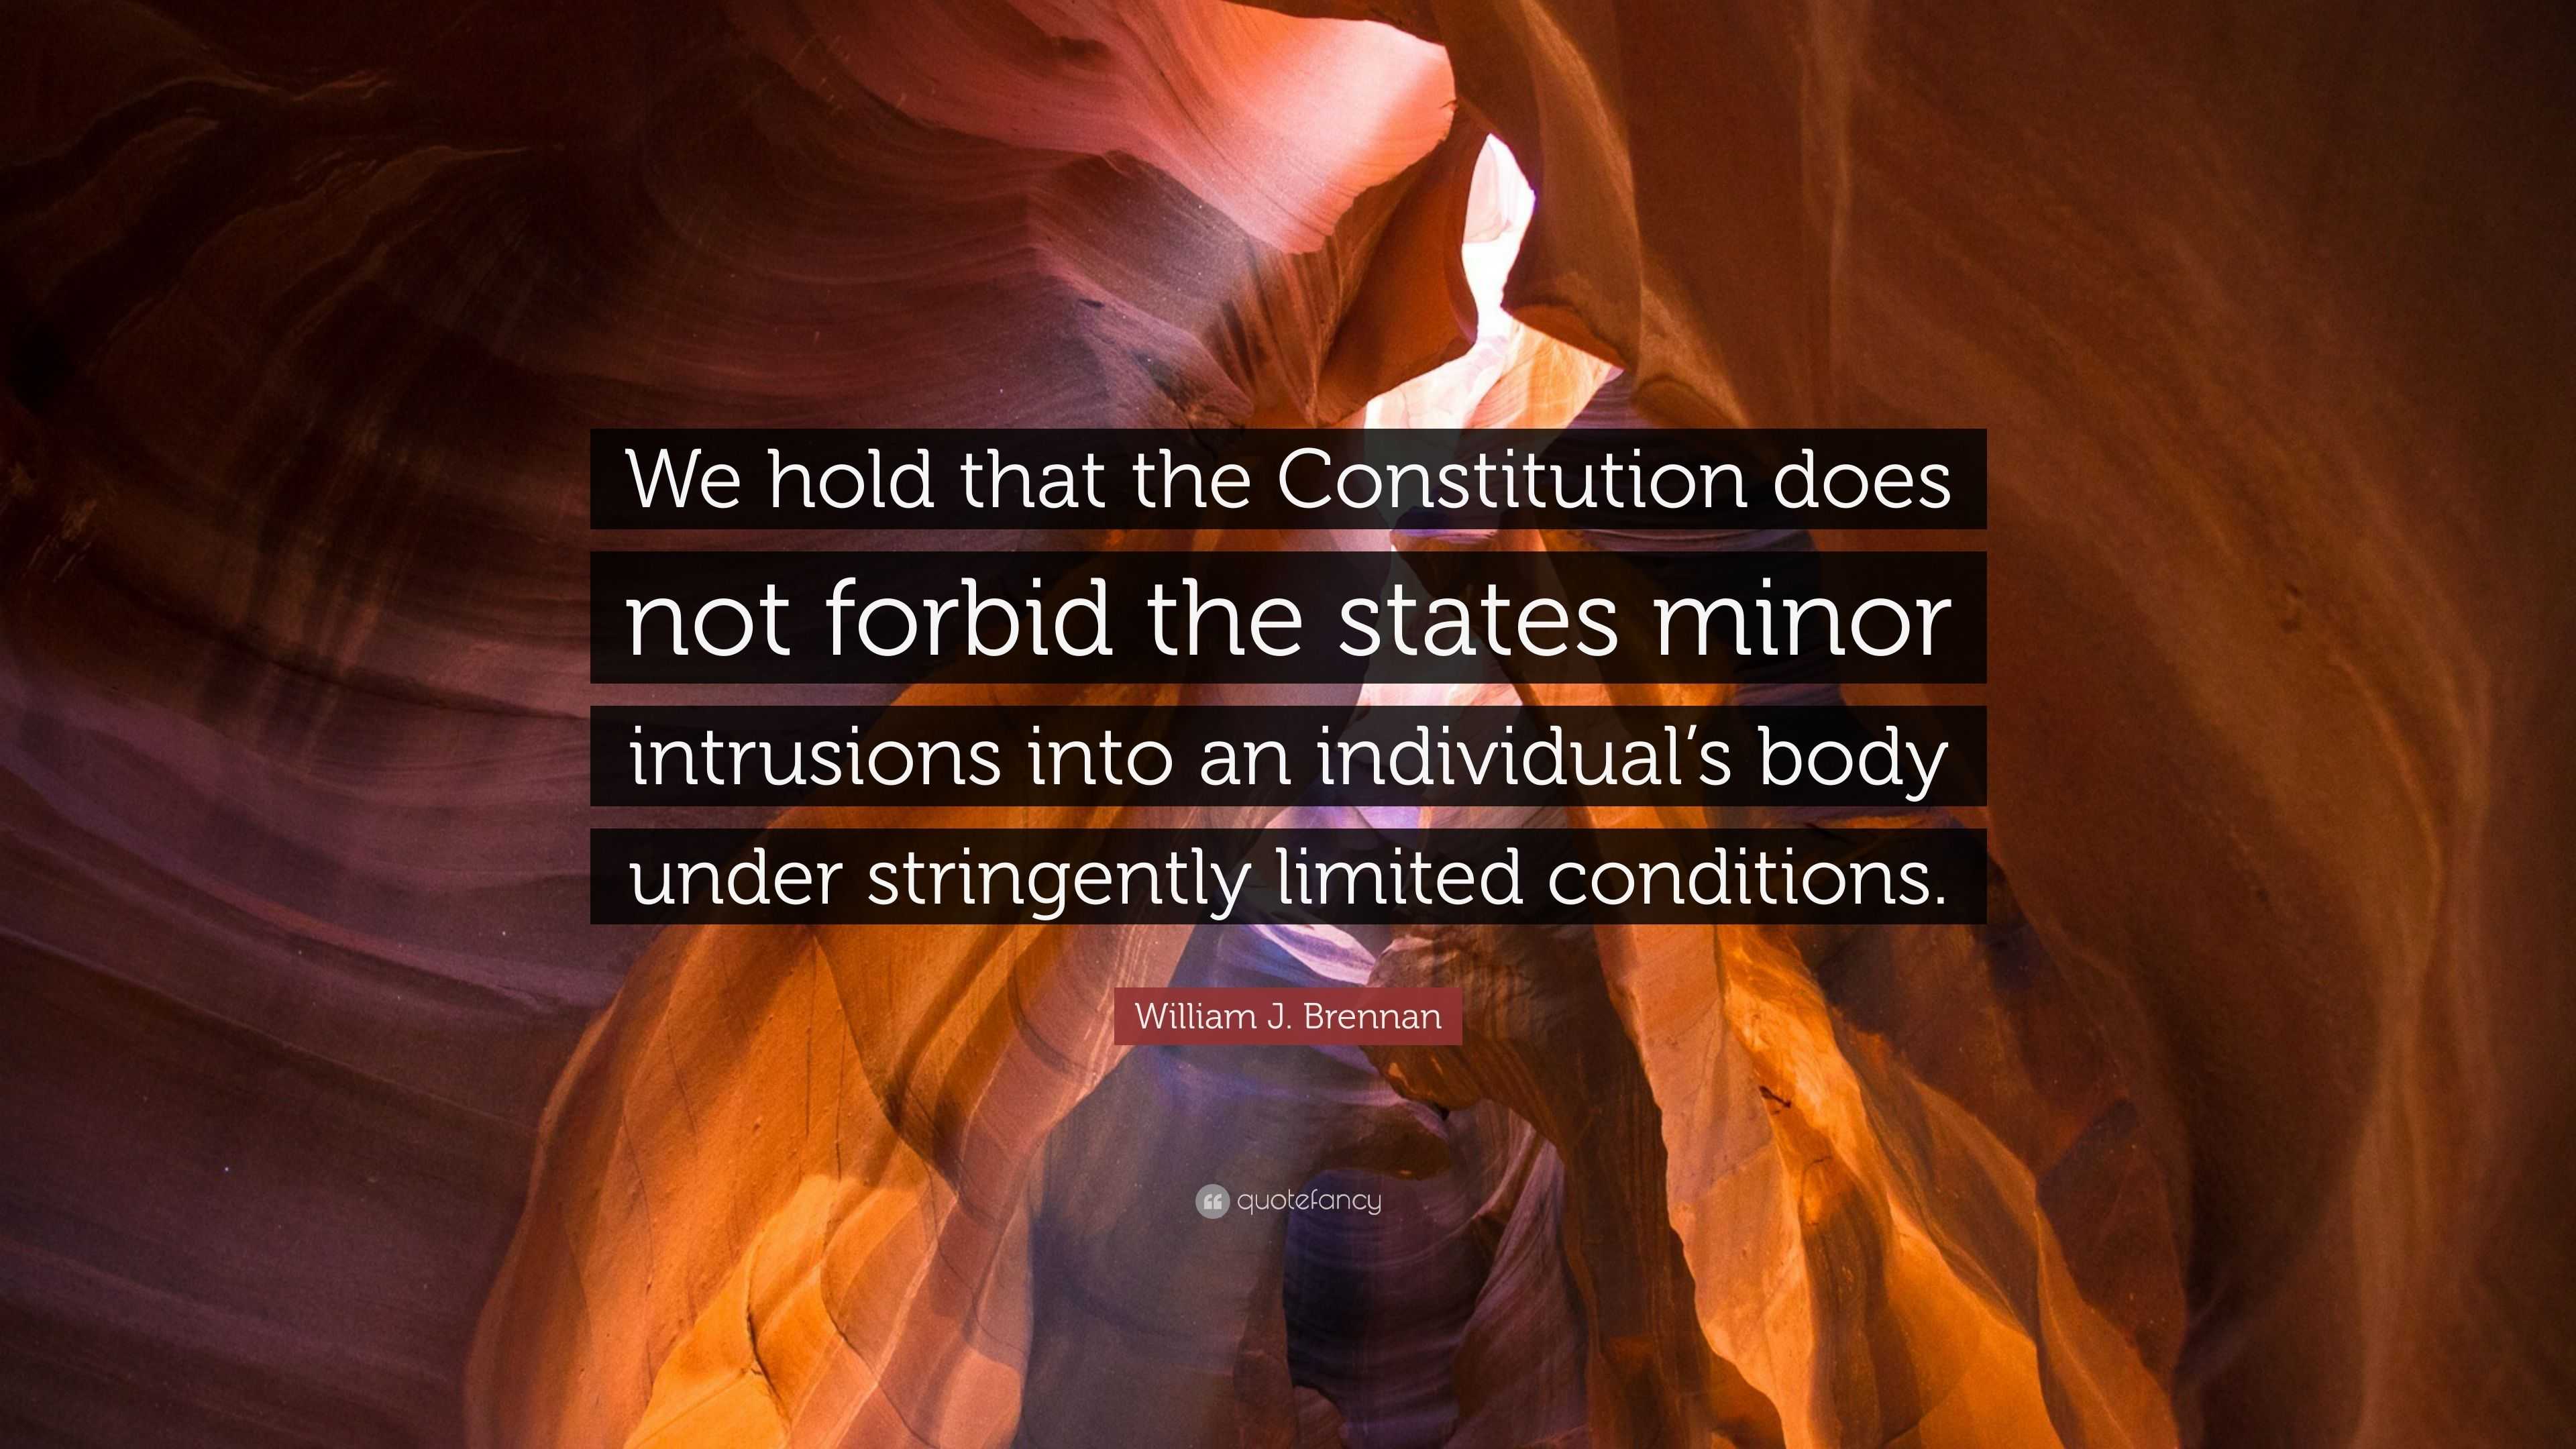 William J Brennan Quote “we Hold That The Constitution Does Not Forbid The States Minor 0596